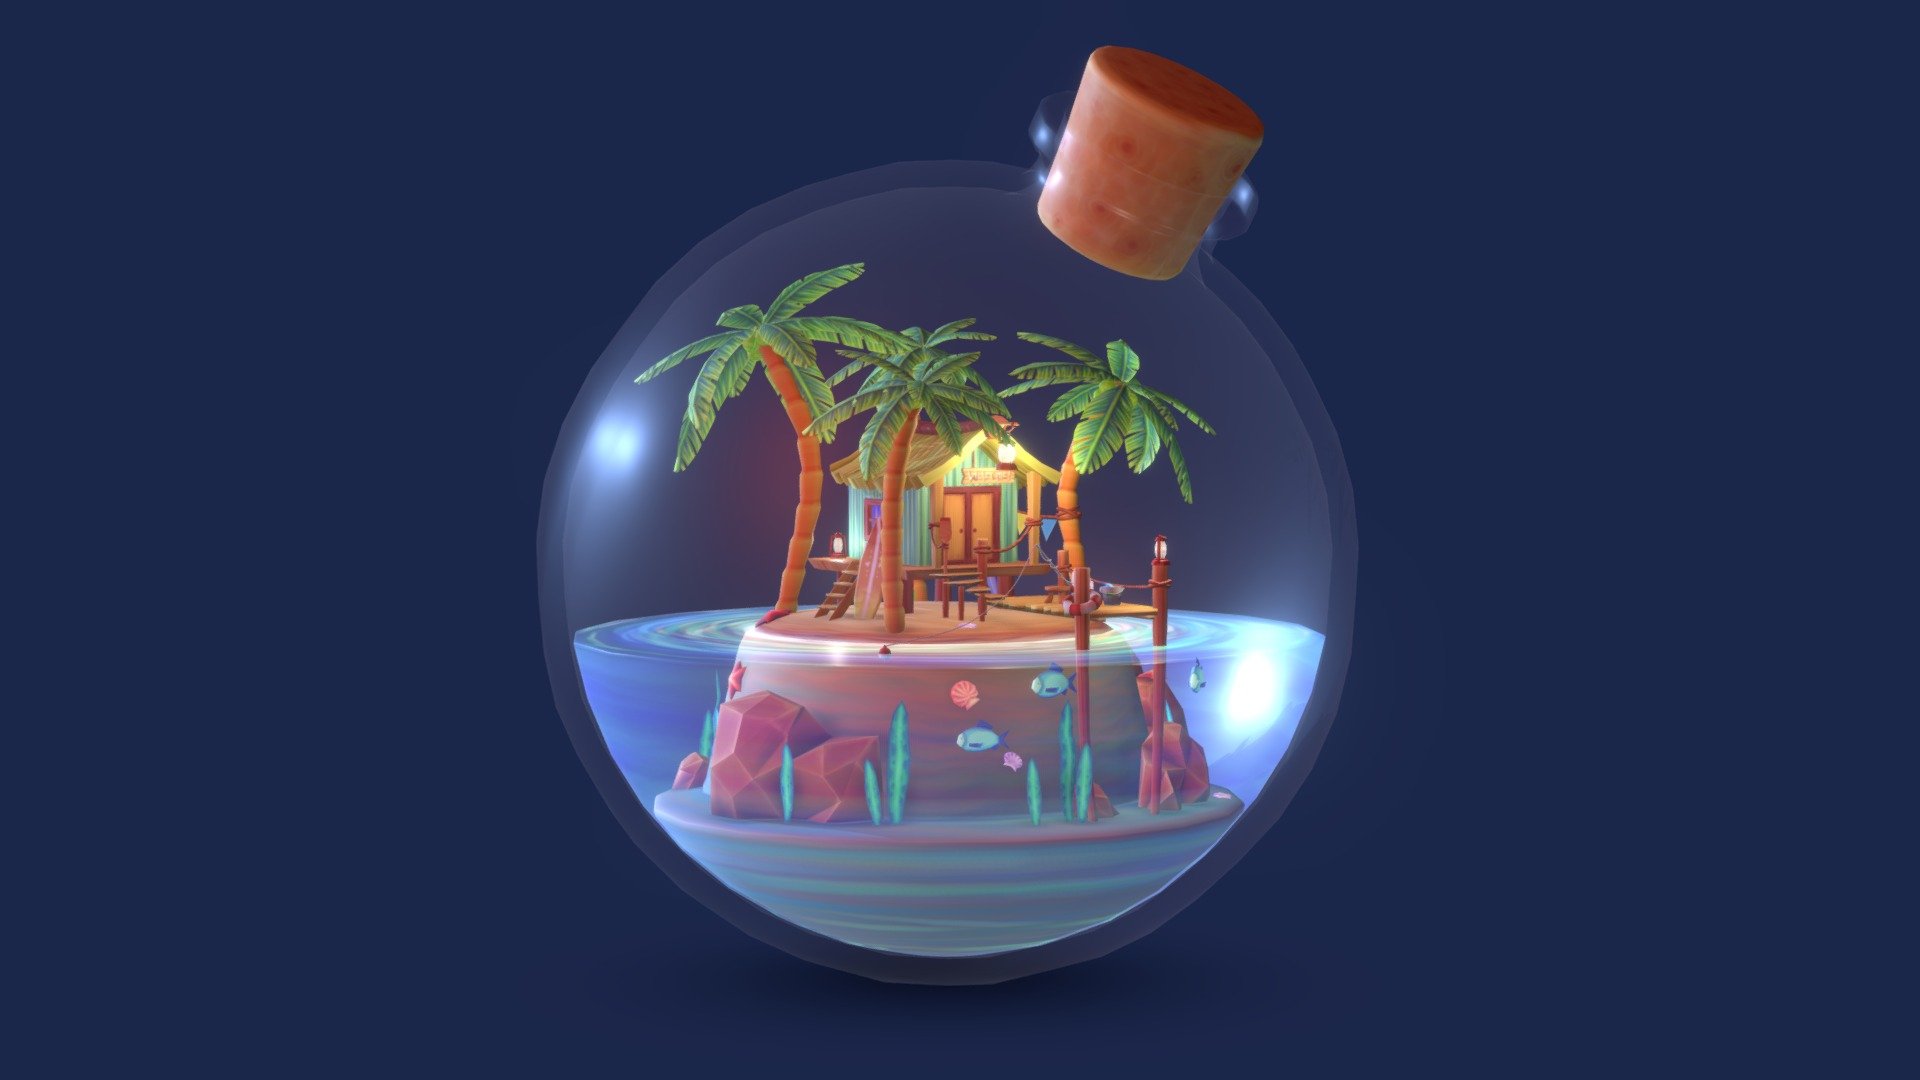 A simple, stylized tiny beach house in a bottle. 
Made with Autodesk Maya, the textures are made in Krita 3d model